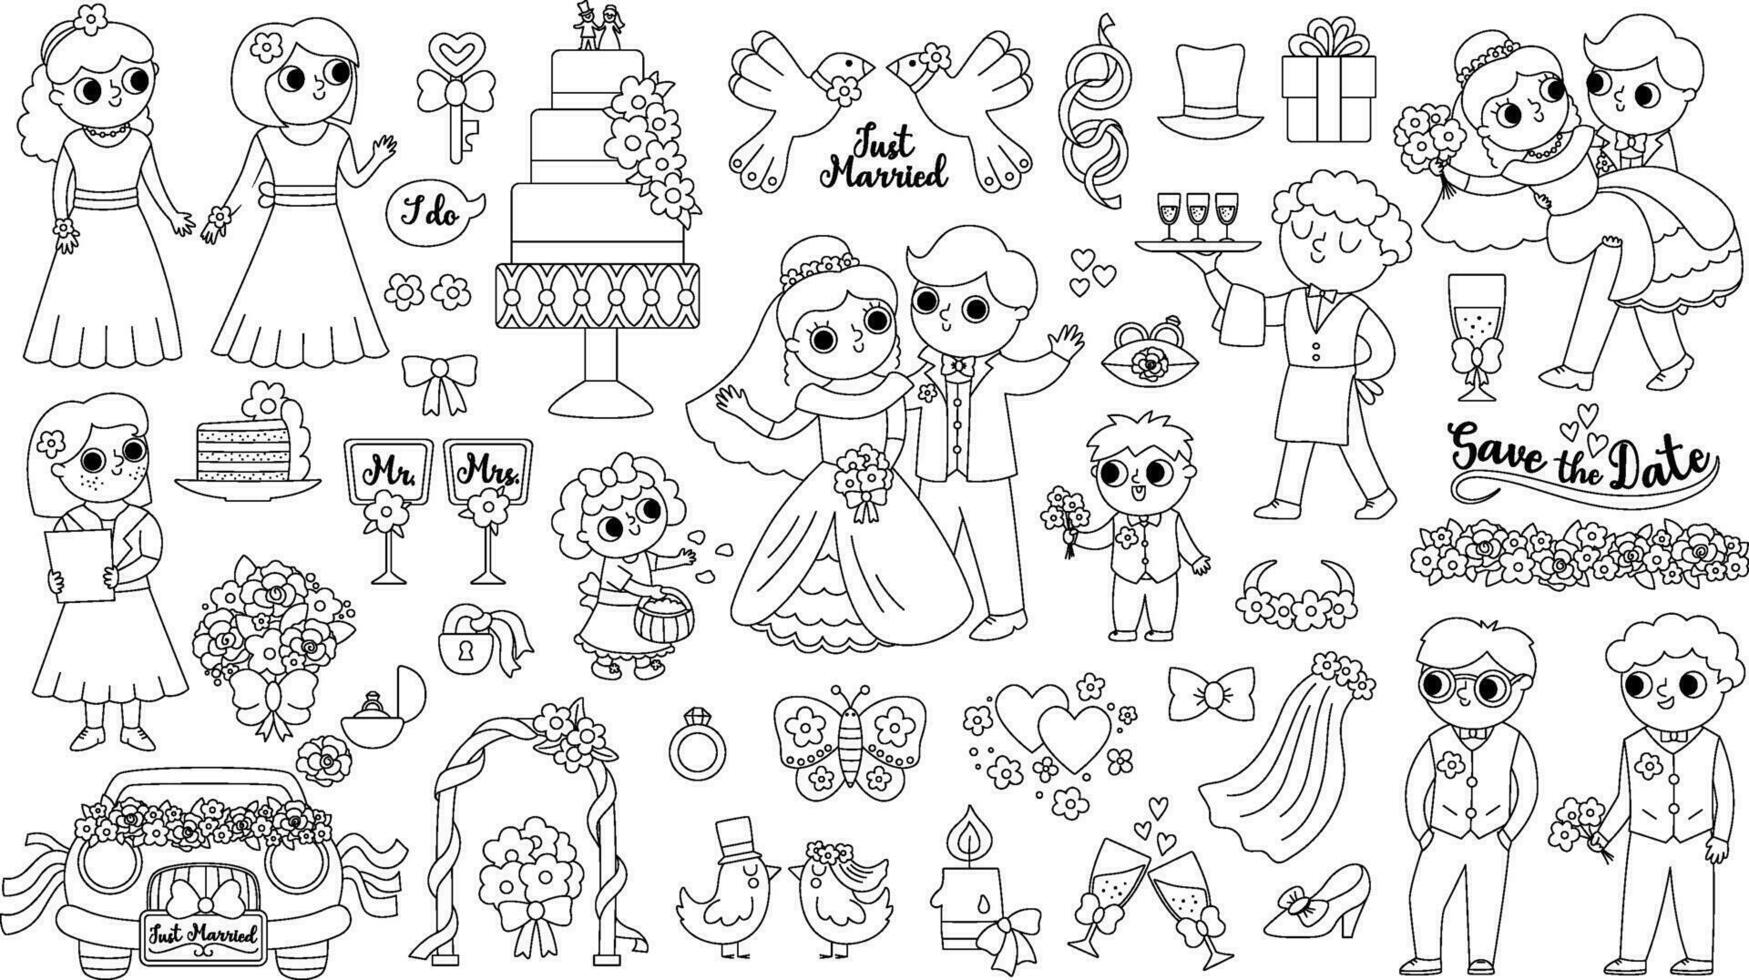 Vector big black and white wedding elements set. Cute marriage line clipart and scenes with bride and groom, bridesmaids, rings, cake. Just married couple collection. Funny ceremony coloring page